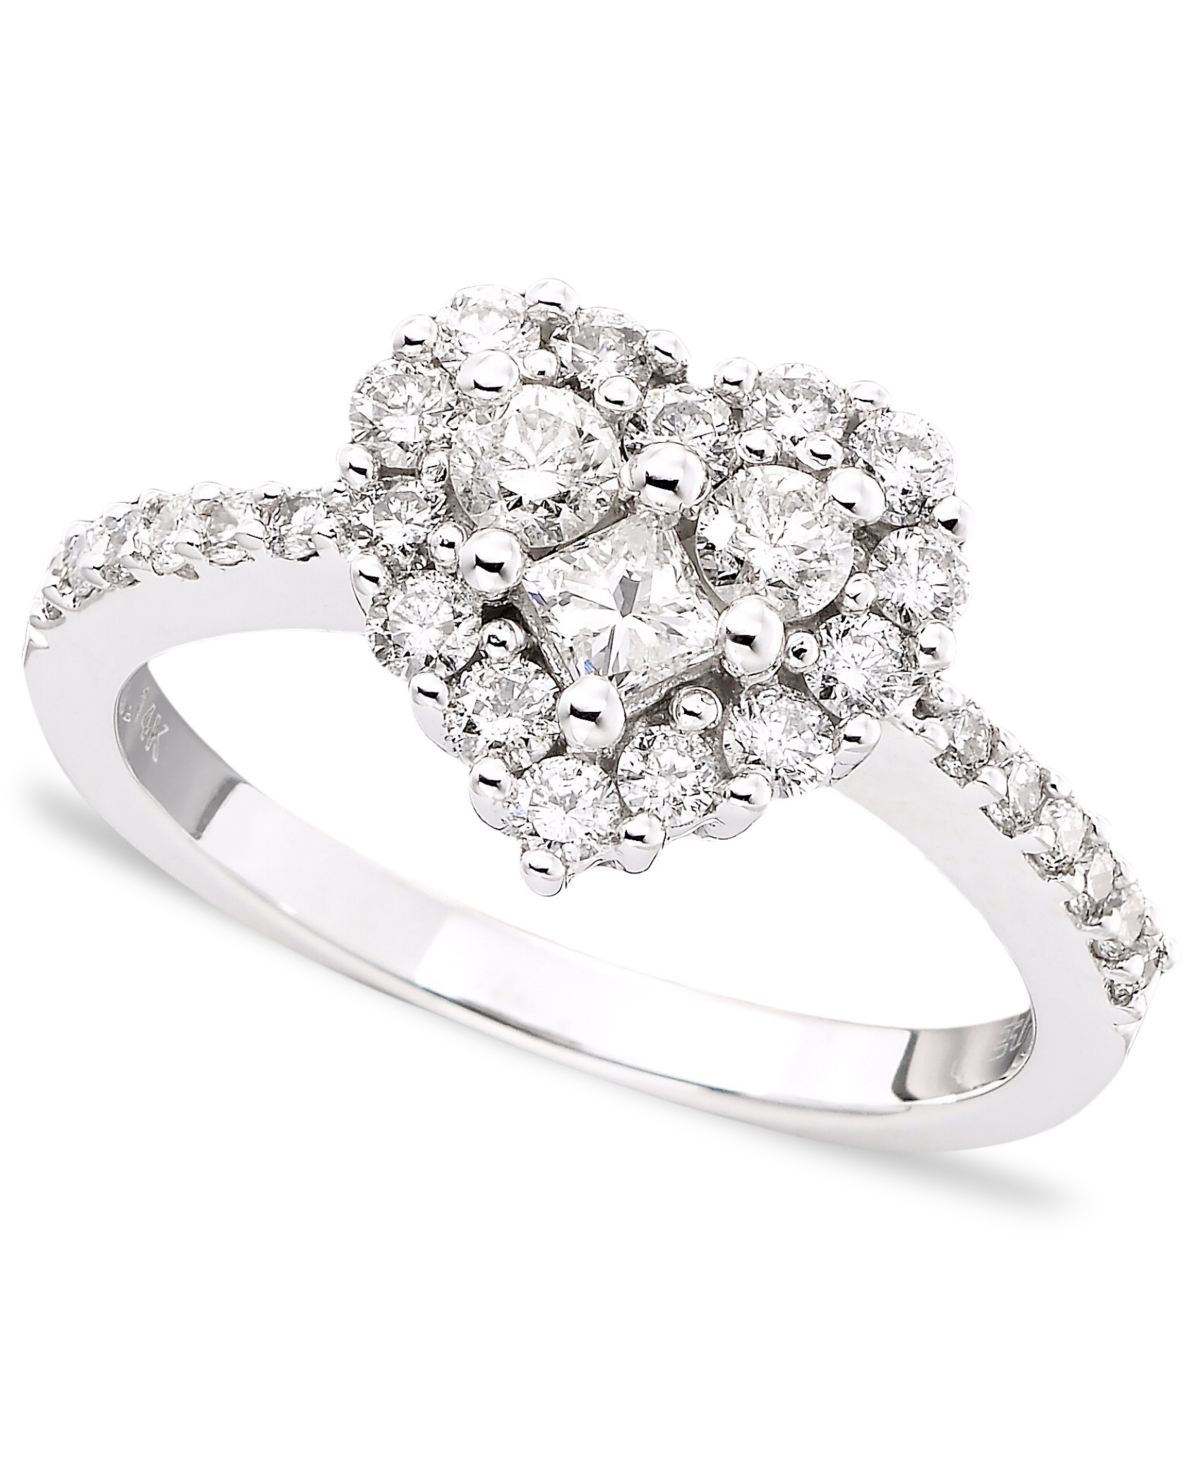 EFFY COLLECTION CLASSIQUE BY EFFY DIAMOND HEART RING (9/10 CT. T.W.) IN IN 14K WHITE, YELLOW, OR ROSE GOLD